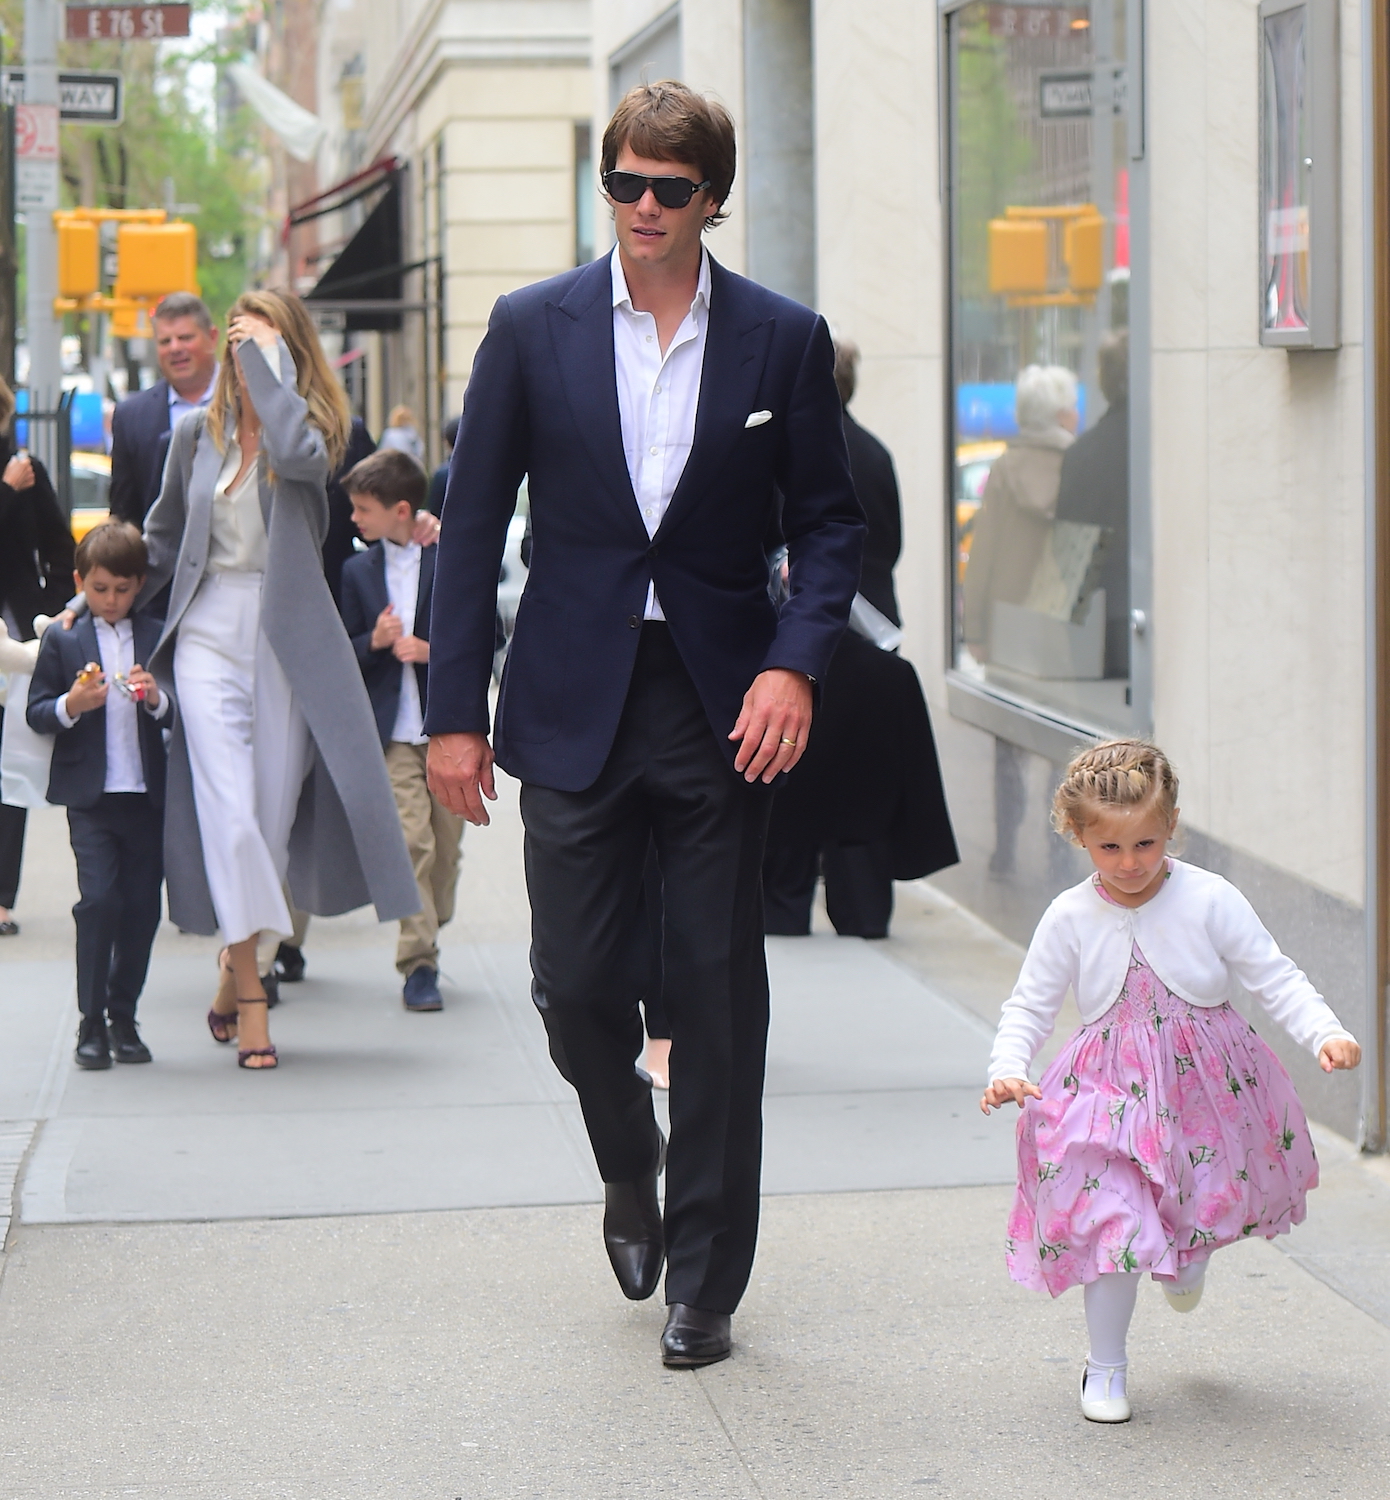 Tom follows his daughter Vivian down the sidewalk with the rest of the family close behind (Photo credit: Splash News)